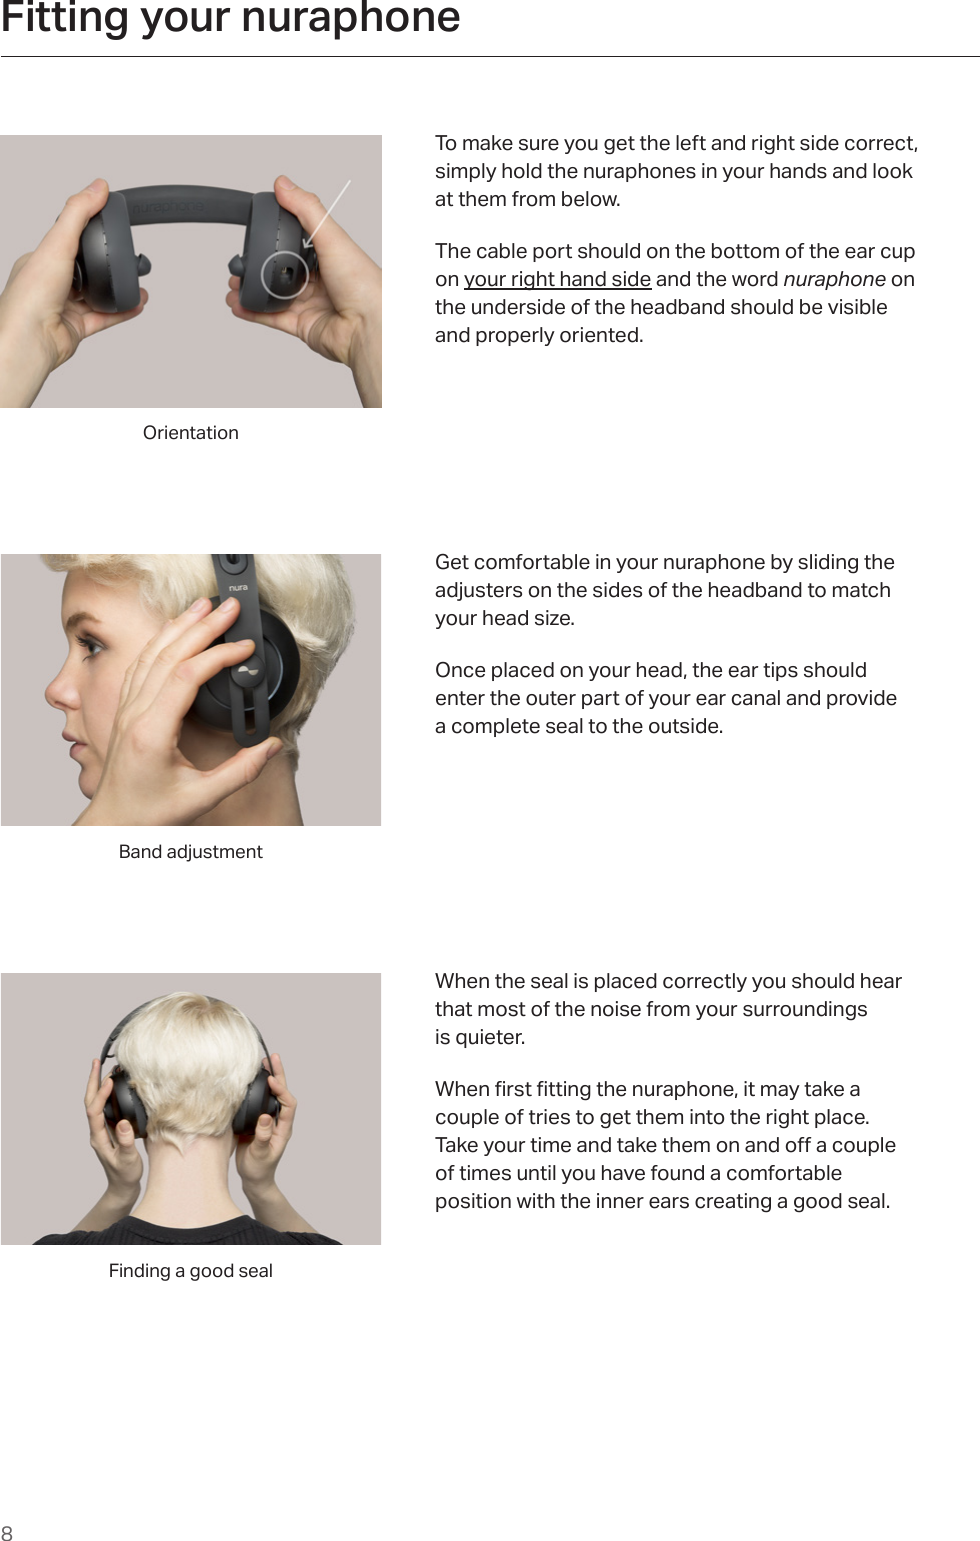 8Fitting your nuraphone                                                             To make sure you get the left and right side correct,  simply hold the nuraphones in your hands and look  at them from below. The cable port should on the bottom of the ear cup on your right hand side and the word nuraphone on the underside of the headband should be visible and properly oriented.Get comfortable in your nuraphone by sliding the adjusters on the sides of the headband to match  your head size. Once placed on your head, the ear tips should  enter the outer part of your ear canal and provide  a complete seal to the outside. Band adjustmentOrientationWhen the seal is placed correctly you should hear that most of the noise from your surroundings  is quieter. Whenrstttingthenuraphone,itmaytakea couple of tries to get them into the right place.  Takeyourtimeandtakethemonandoacouple of times until you have found a comfortable position with the inner ears creating a good seal. Finding a good seal